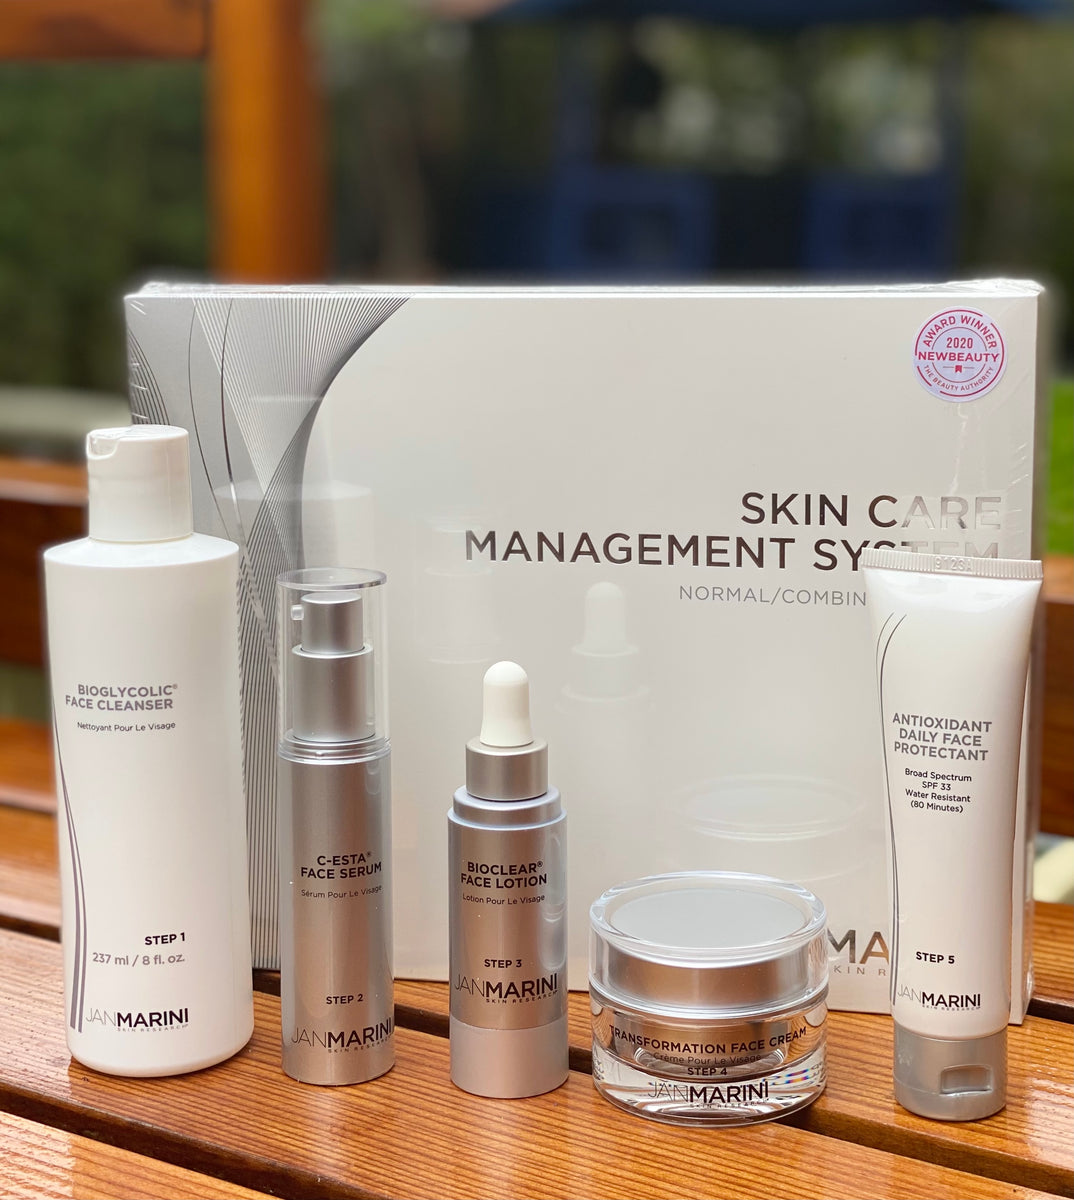 Jan Marini Skin Management System is Clients favorite skin care system 10 years running